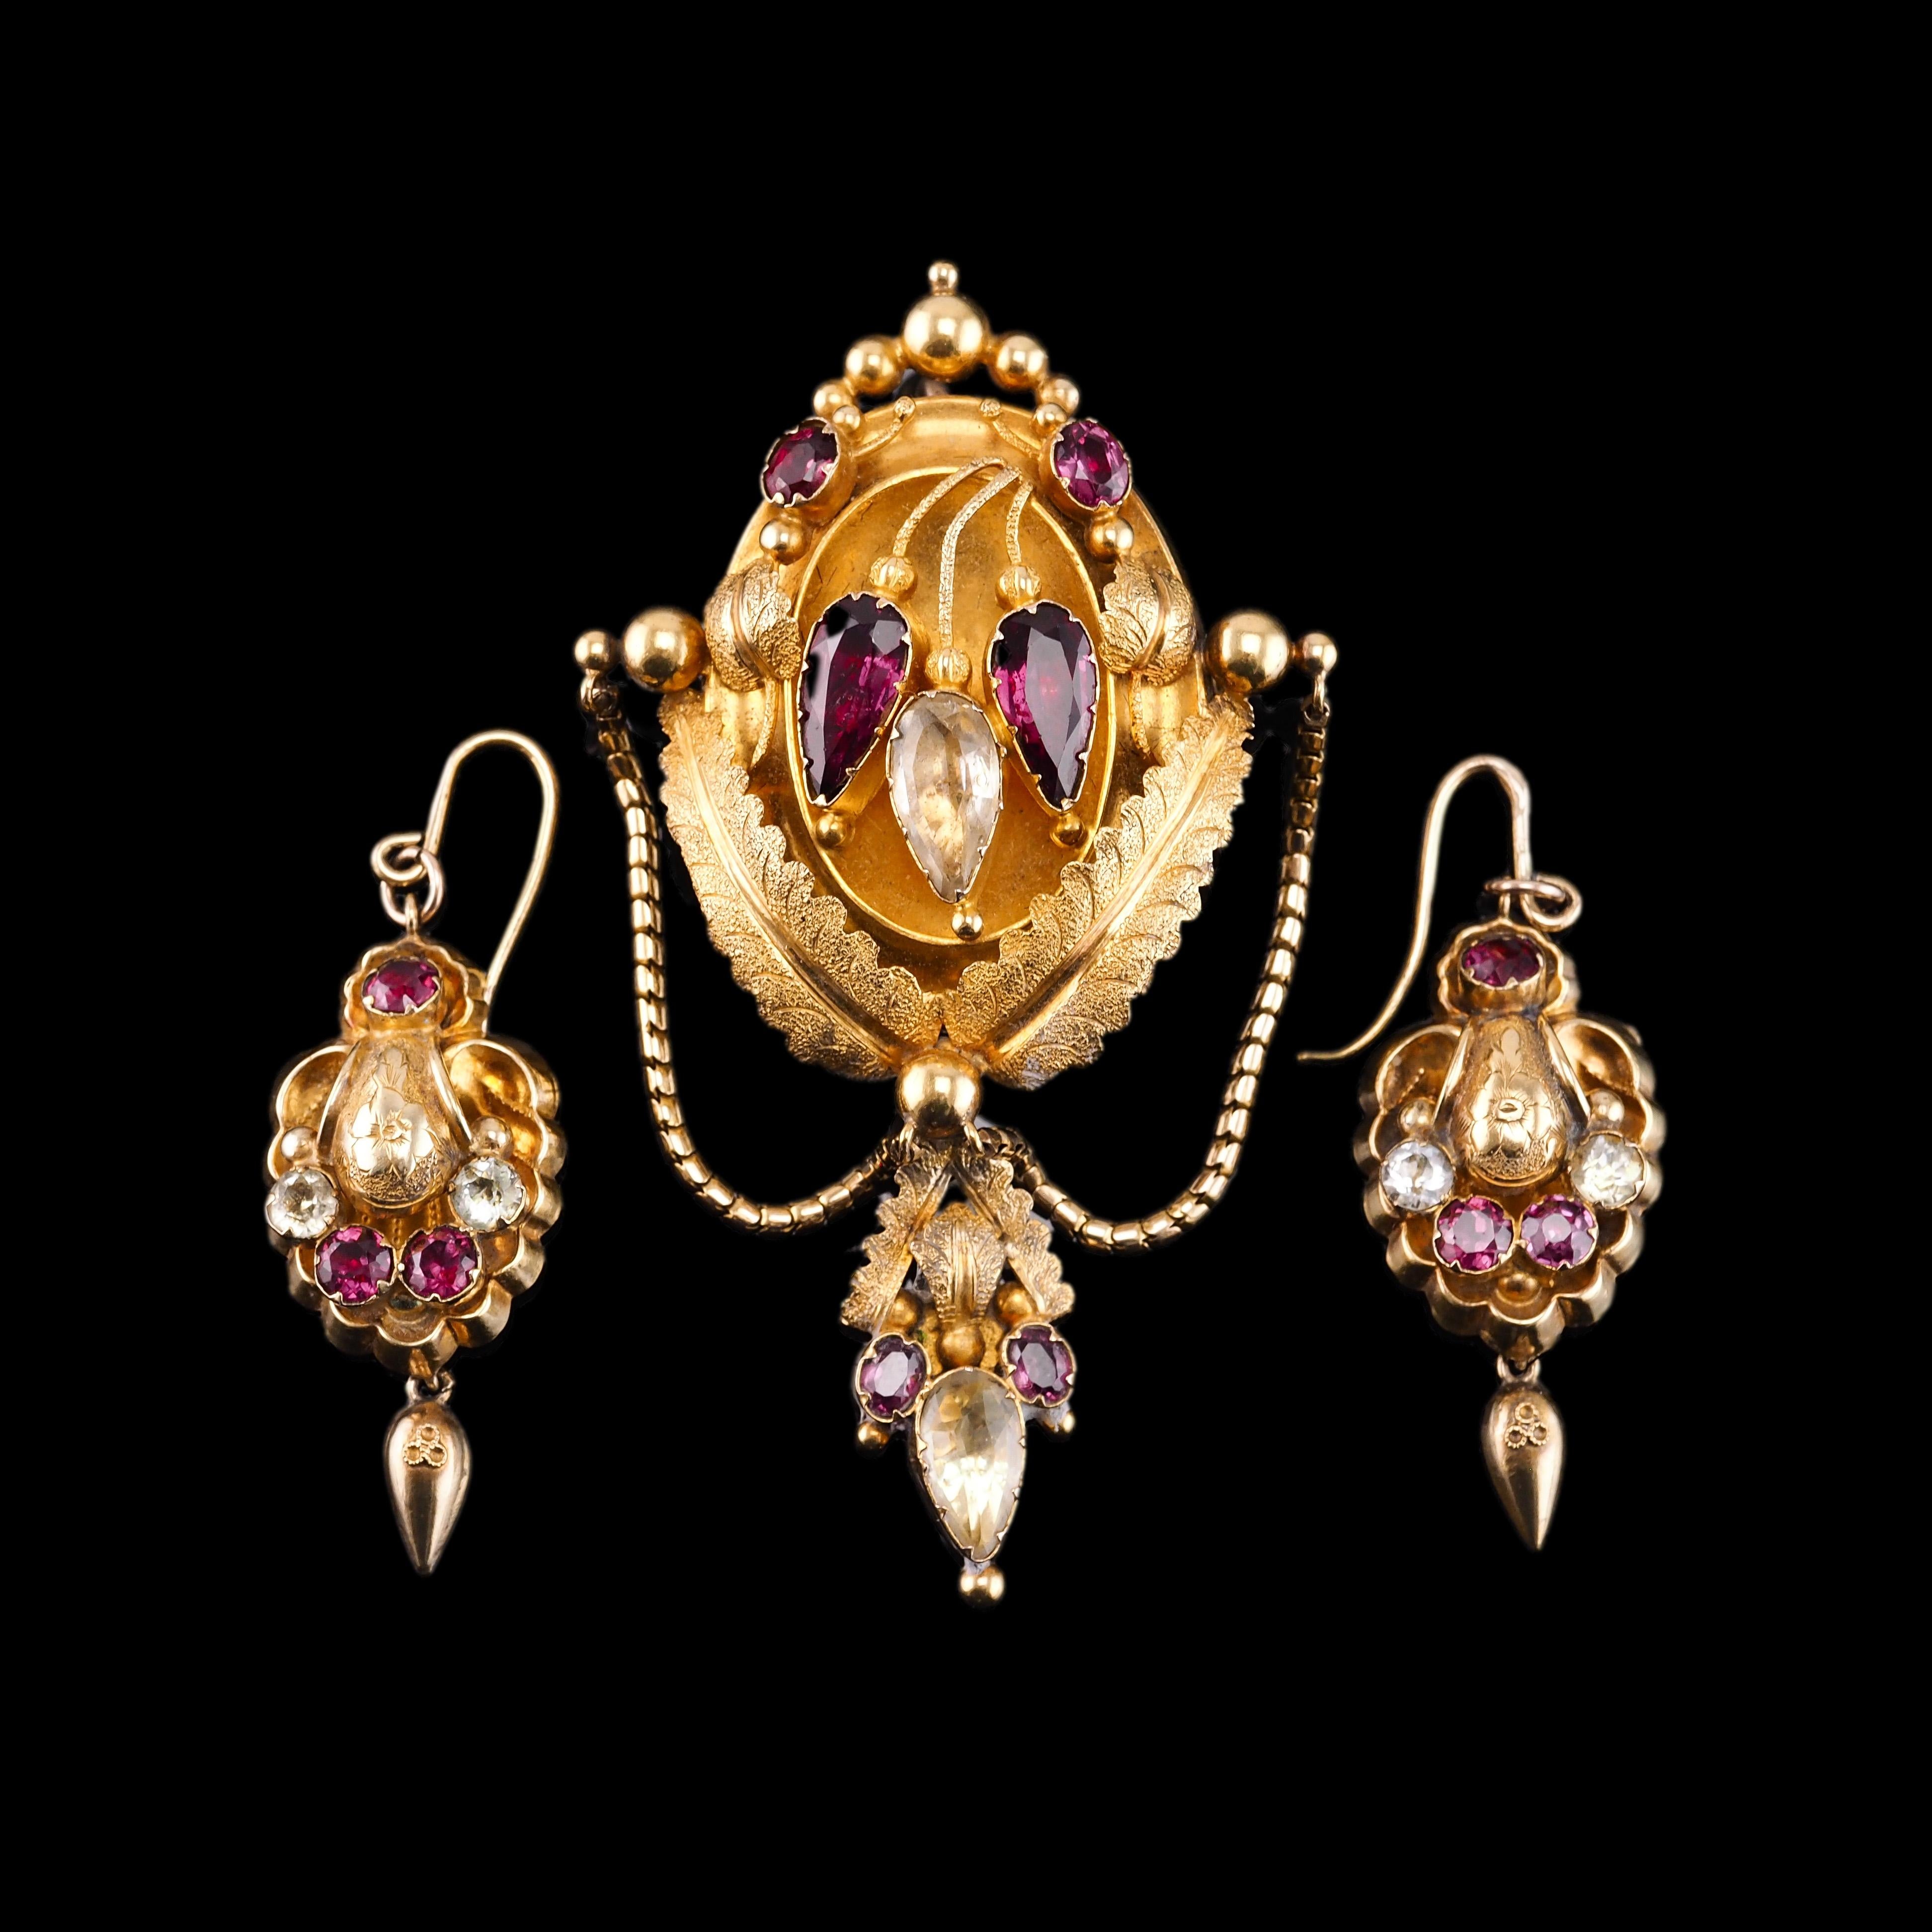 Welcome to Artisan Antiques based in Mayfair, London - We are delighted to offer this magnificent three-piece set of Victorian 18ct gold brooch/pendant & earrings. *Please note that the photographed antique hardshell box is not included and is for